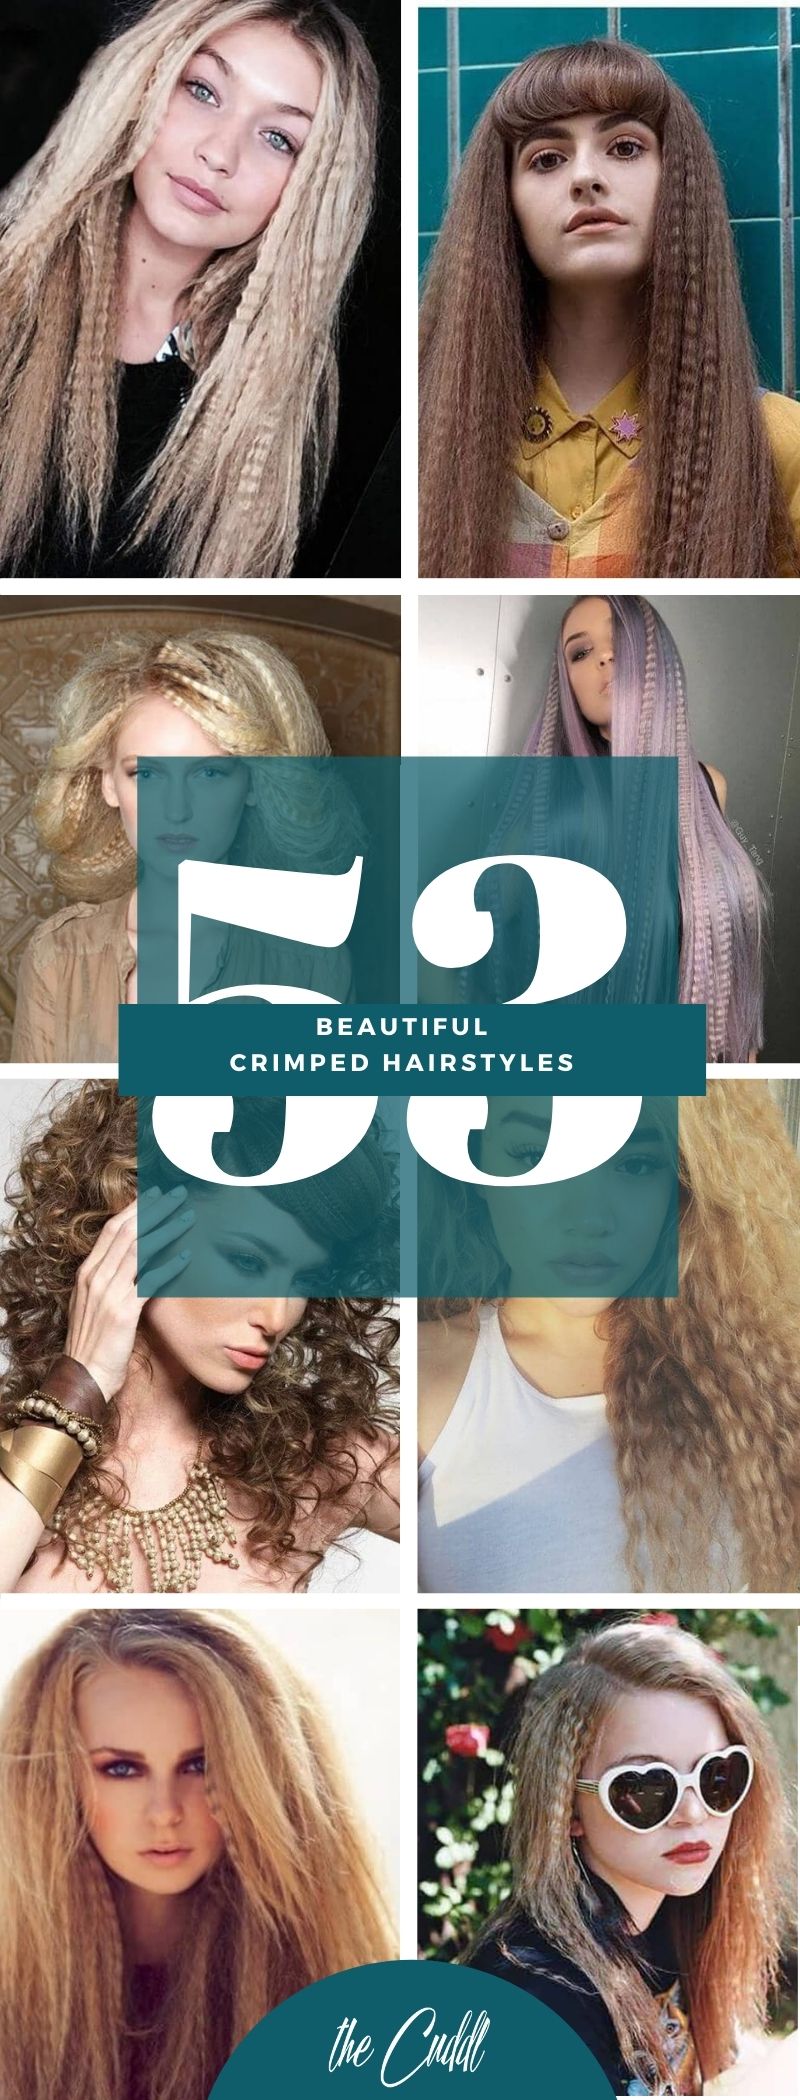 50 Edgy Crimped Hairstyle Ideas to Update Your Look